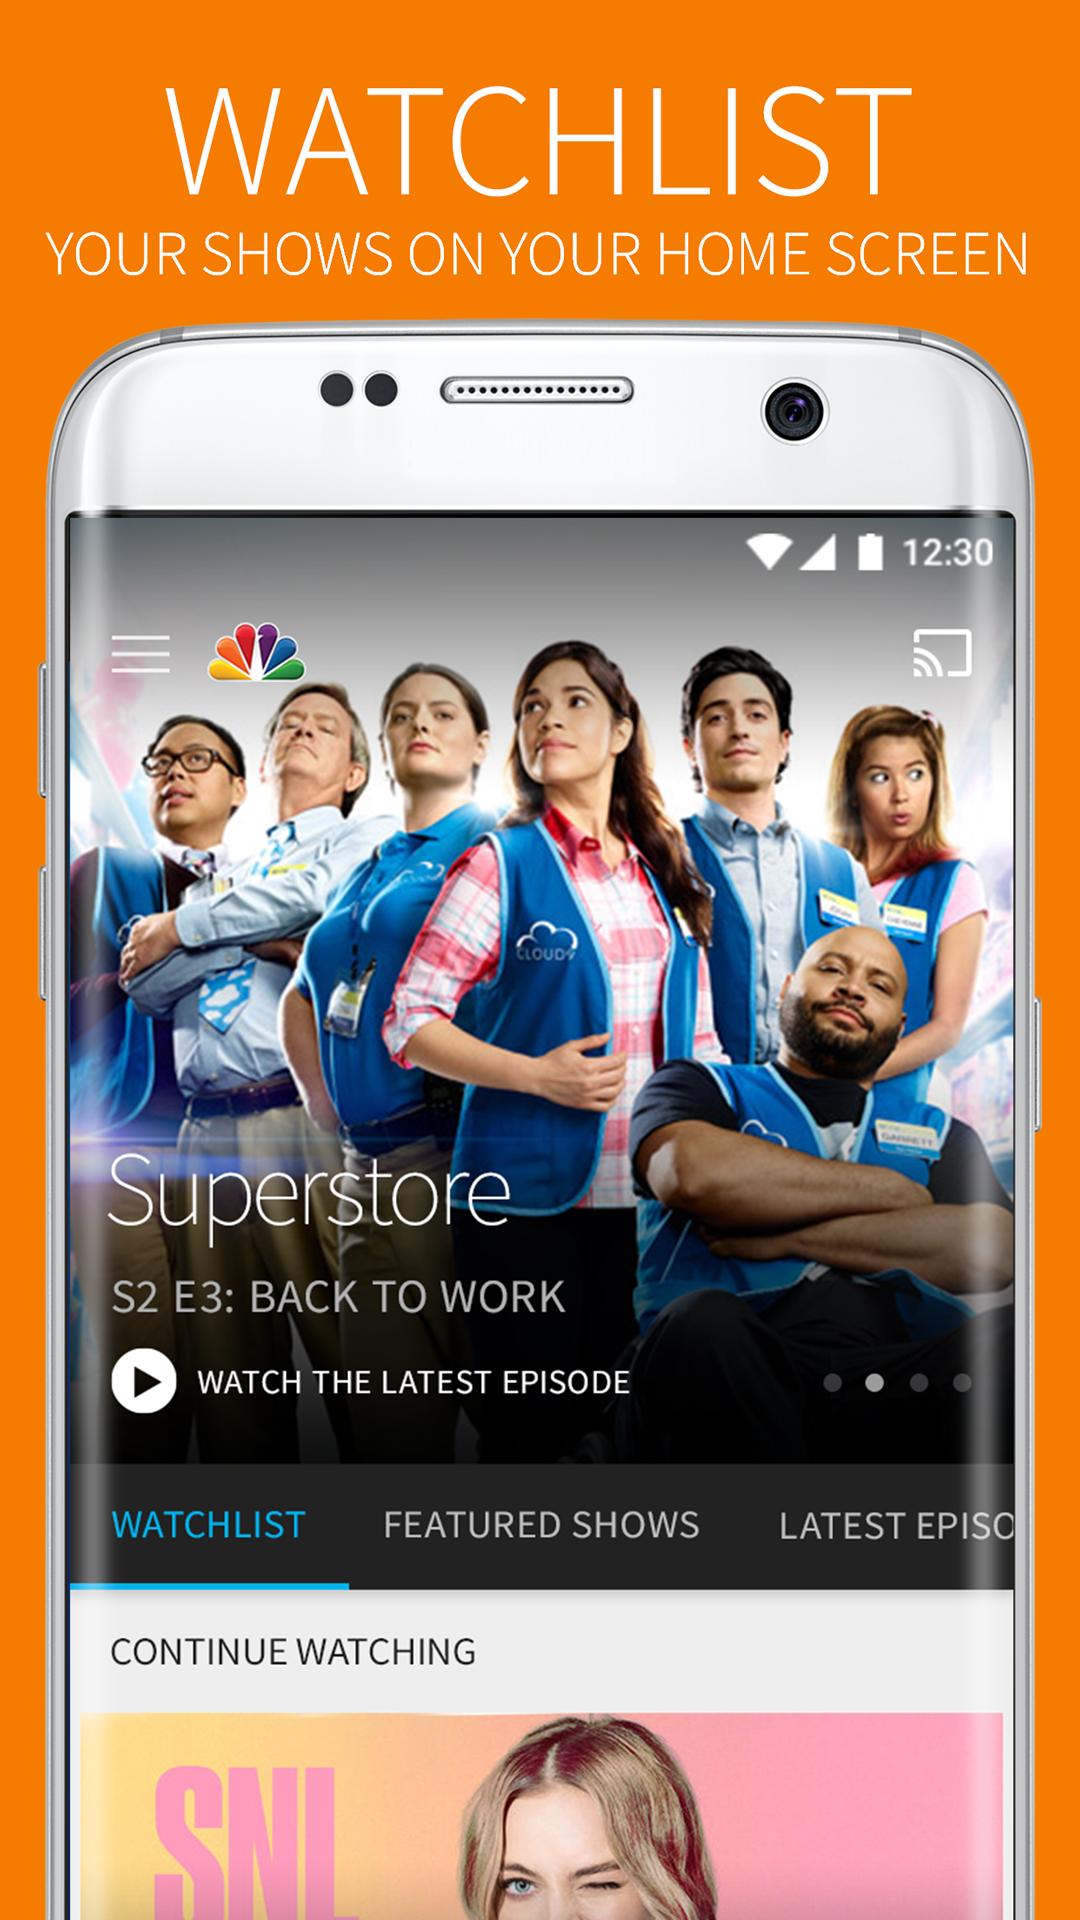 how do you get credits on the nbc app